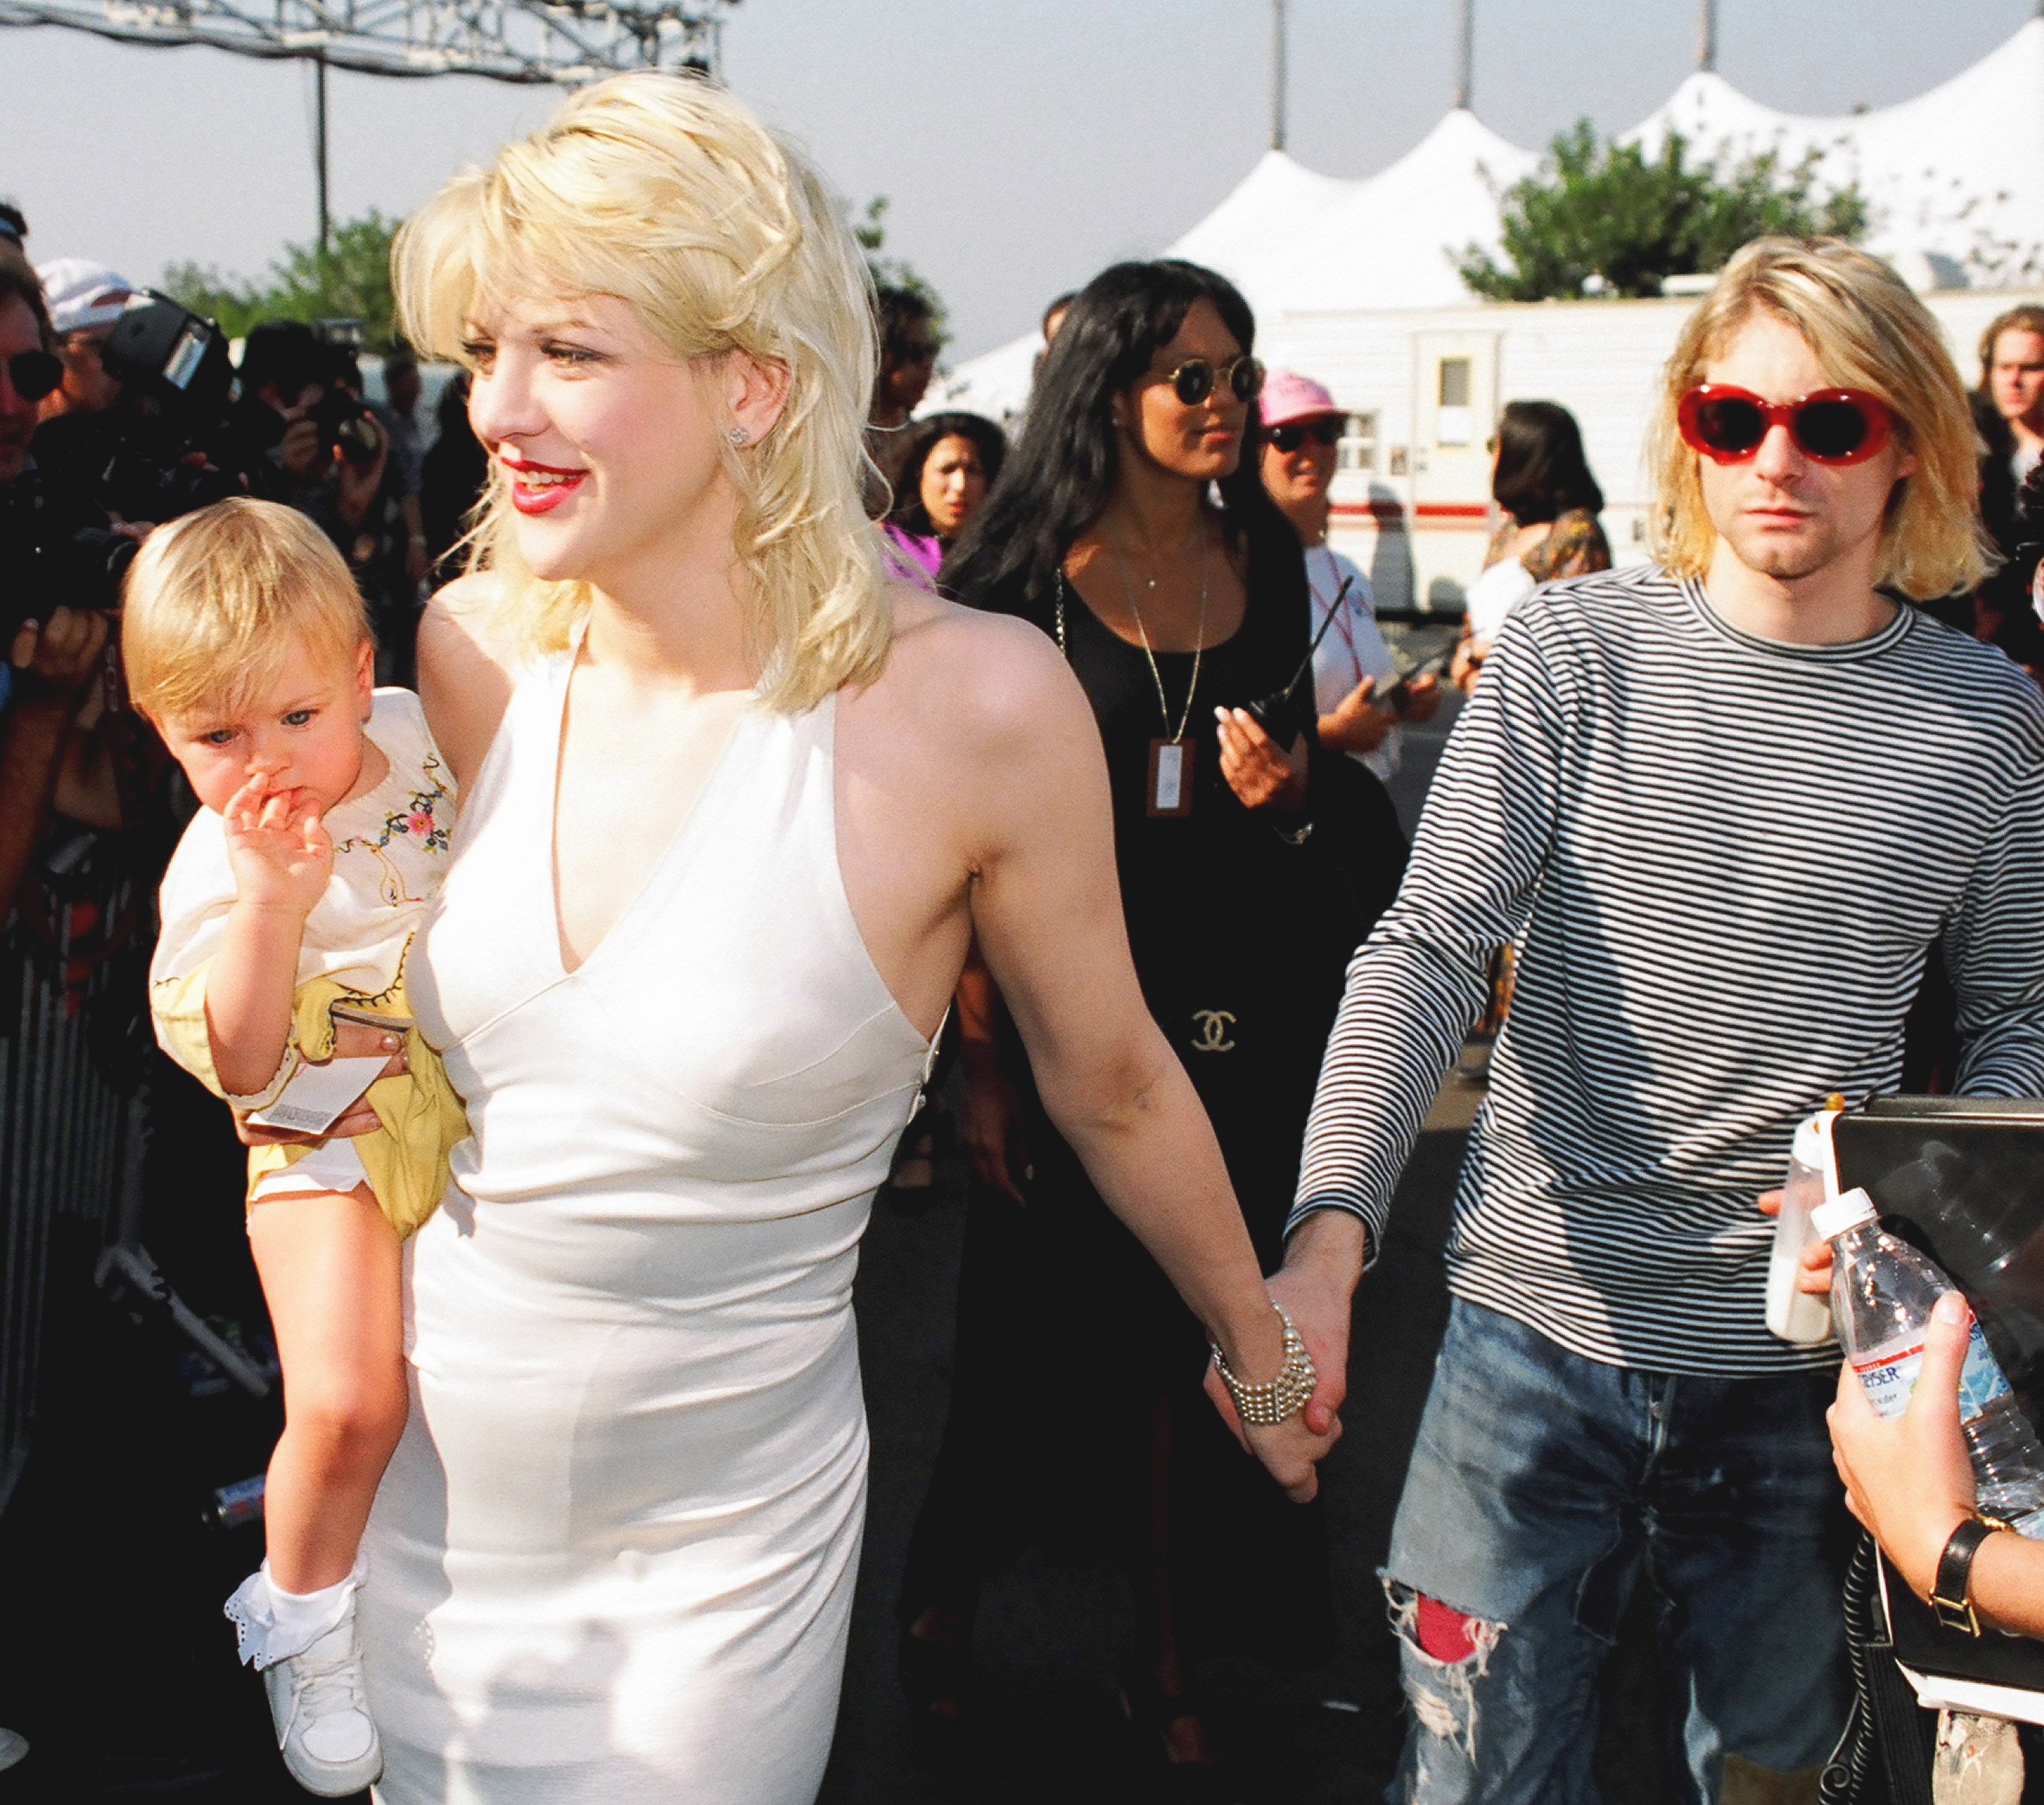 Courtney Love, Frances Bean Cobain, and Kurt Cobain at the 1993 MTV Video Music Awards on September 2, 1993 | Source: Getty Images